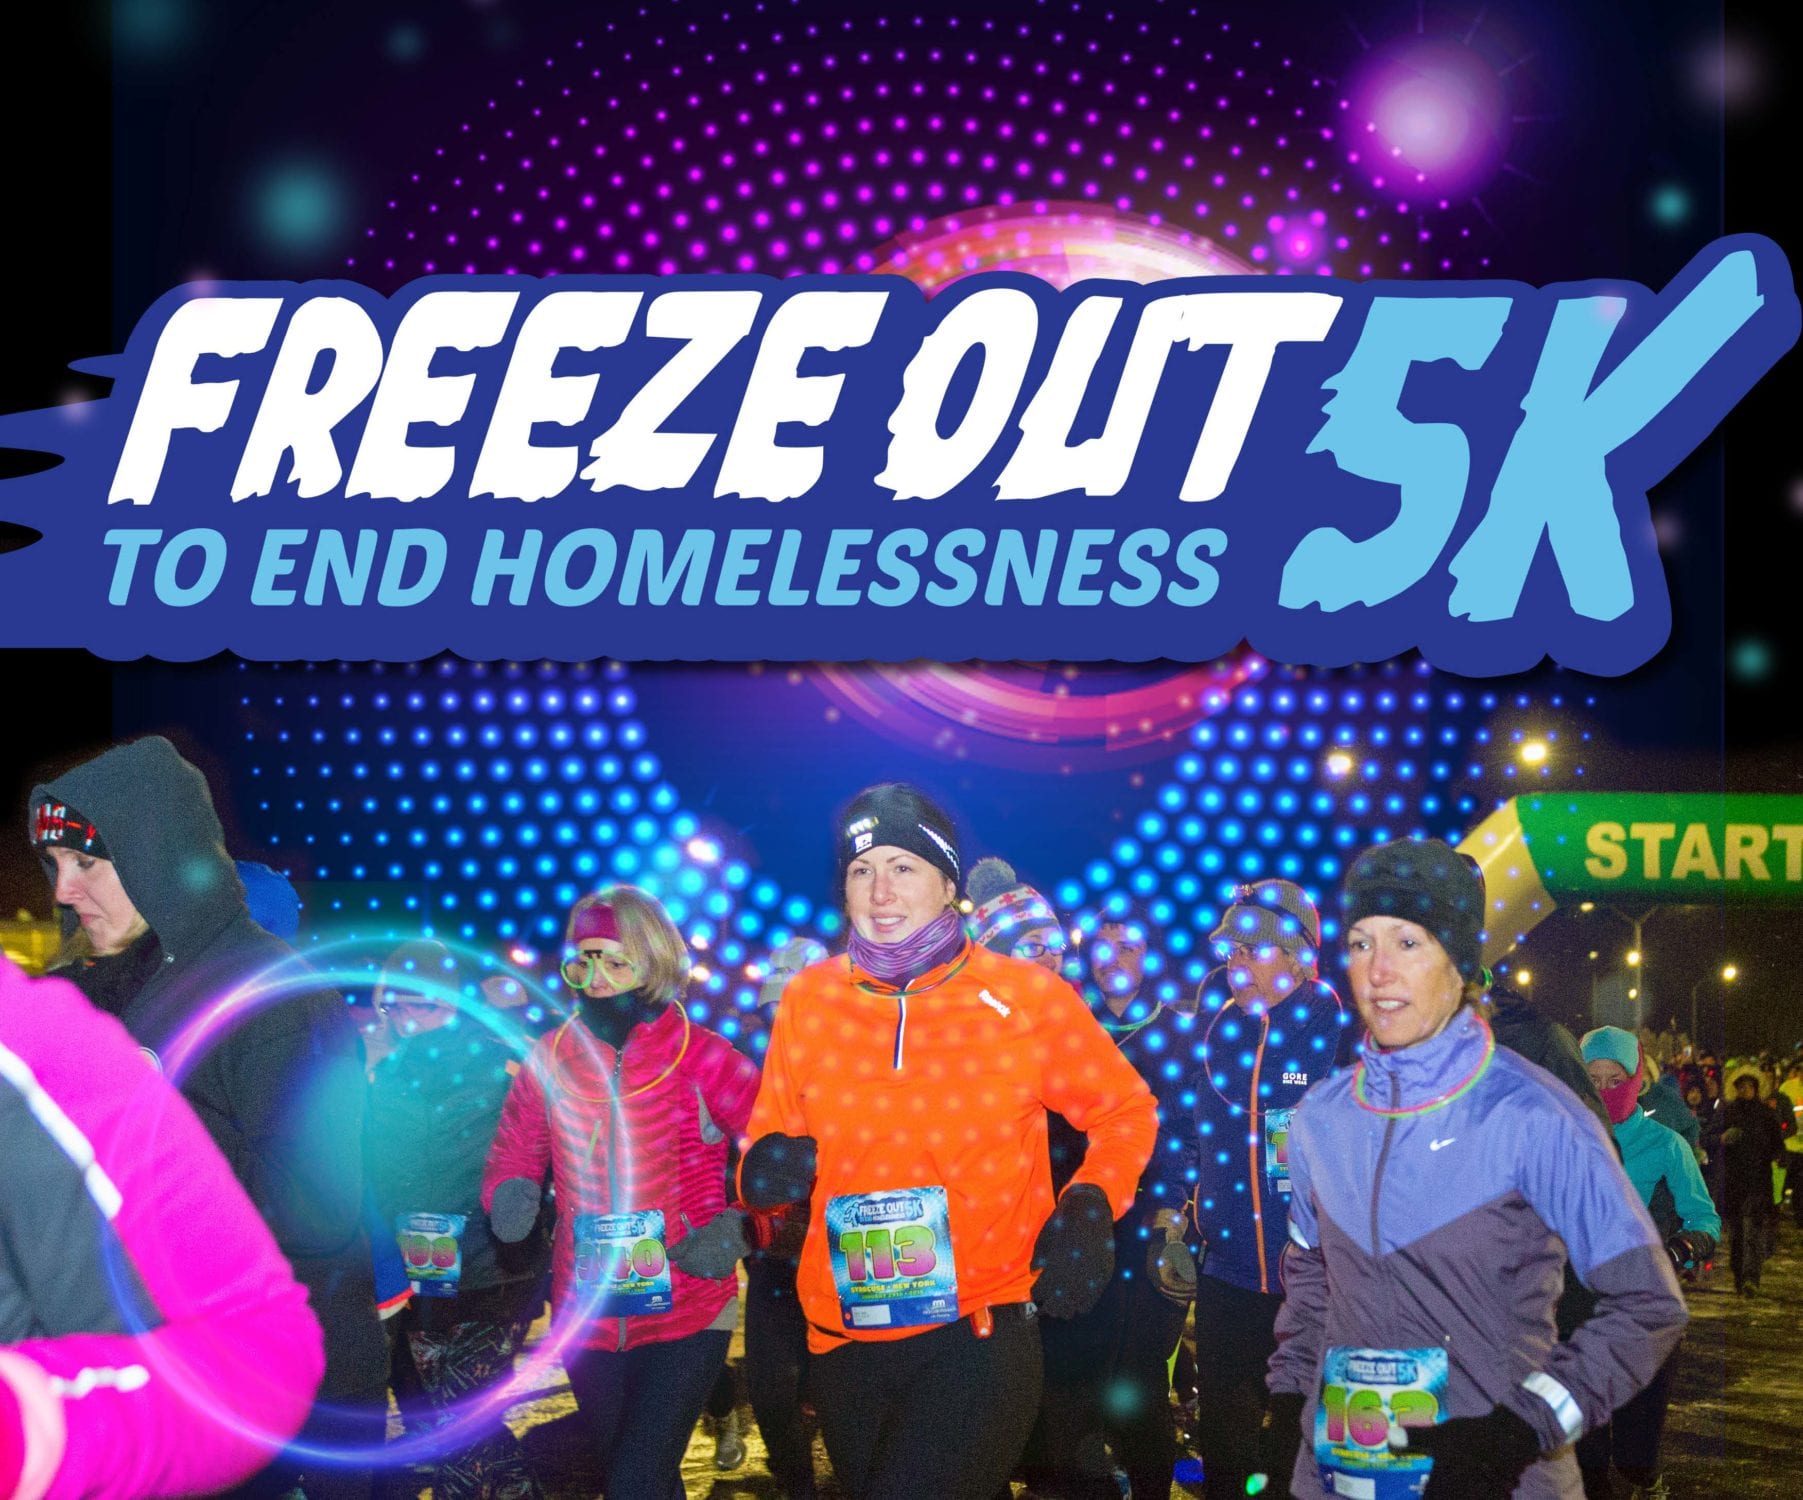 In the Community: Freeze Out 5K on Feb. 23